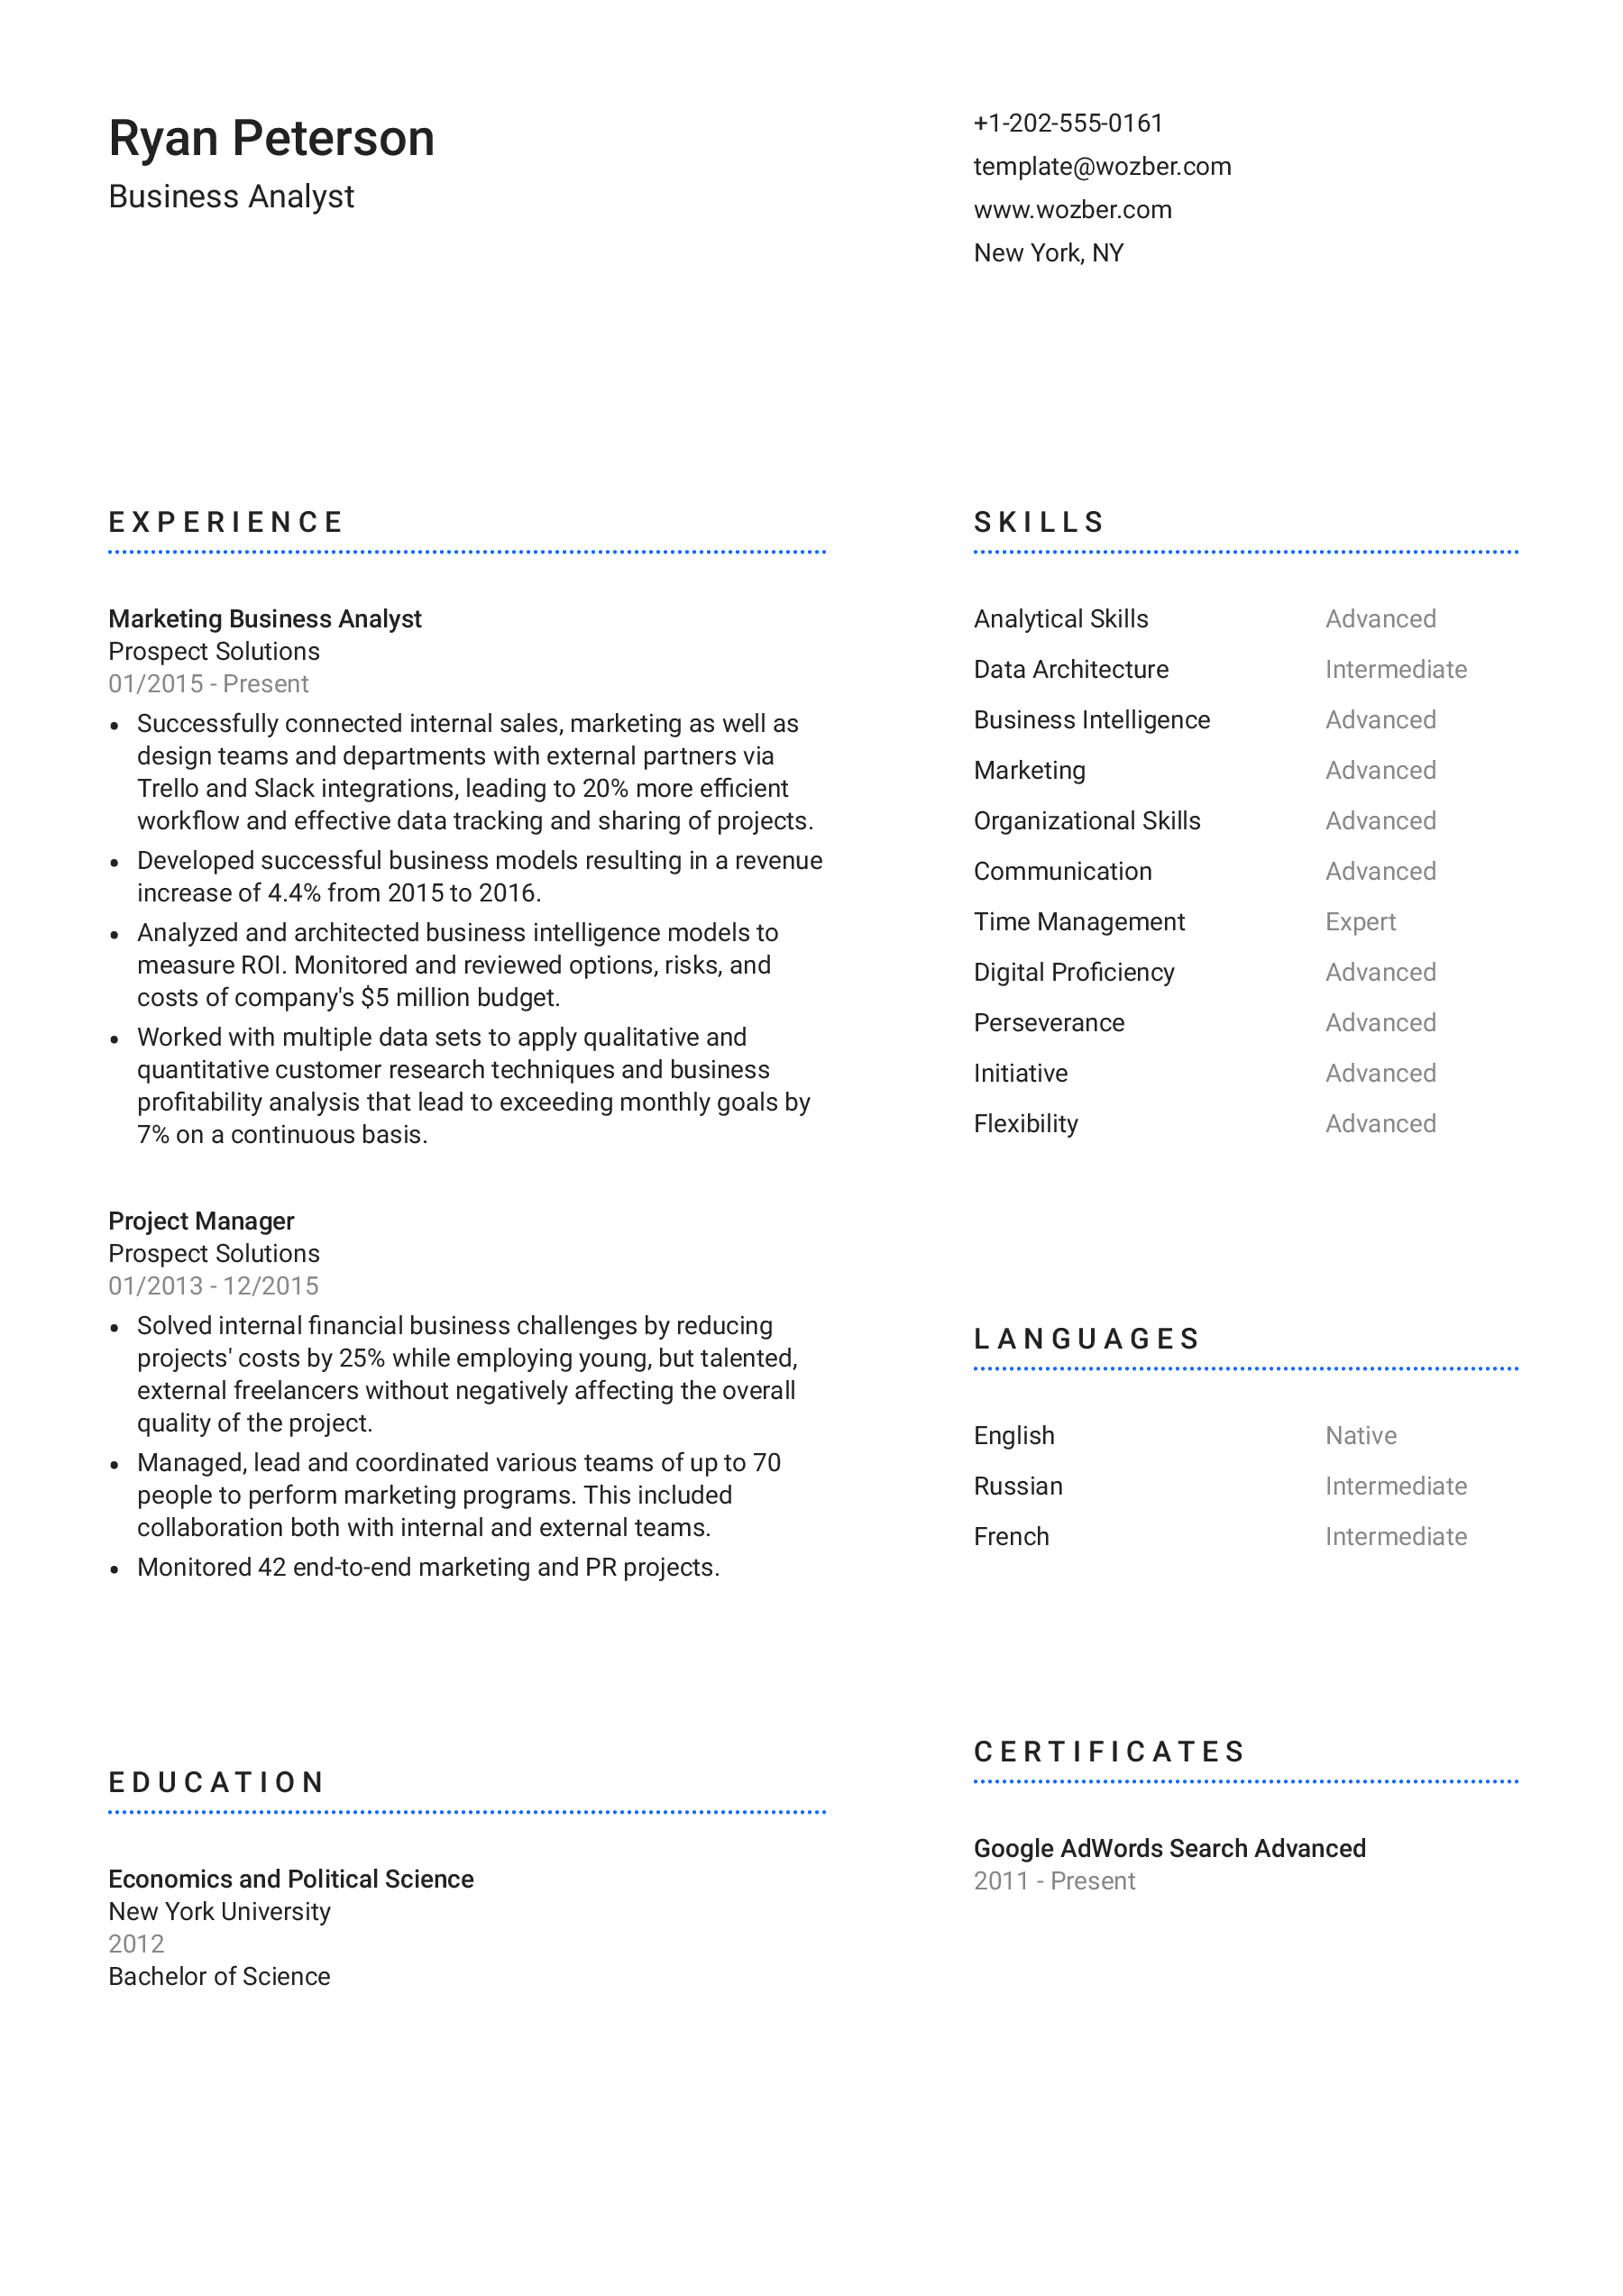 A professional CV template with a solid-looking design.